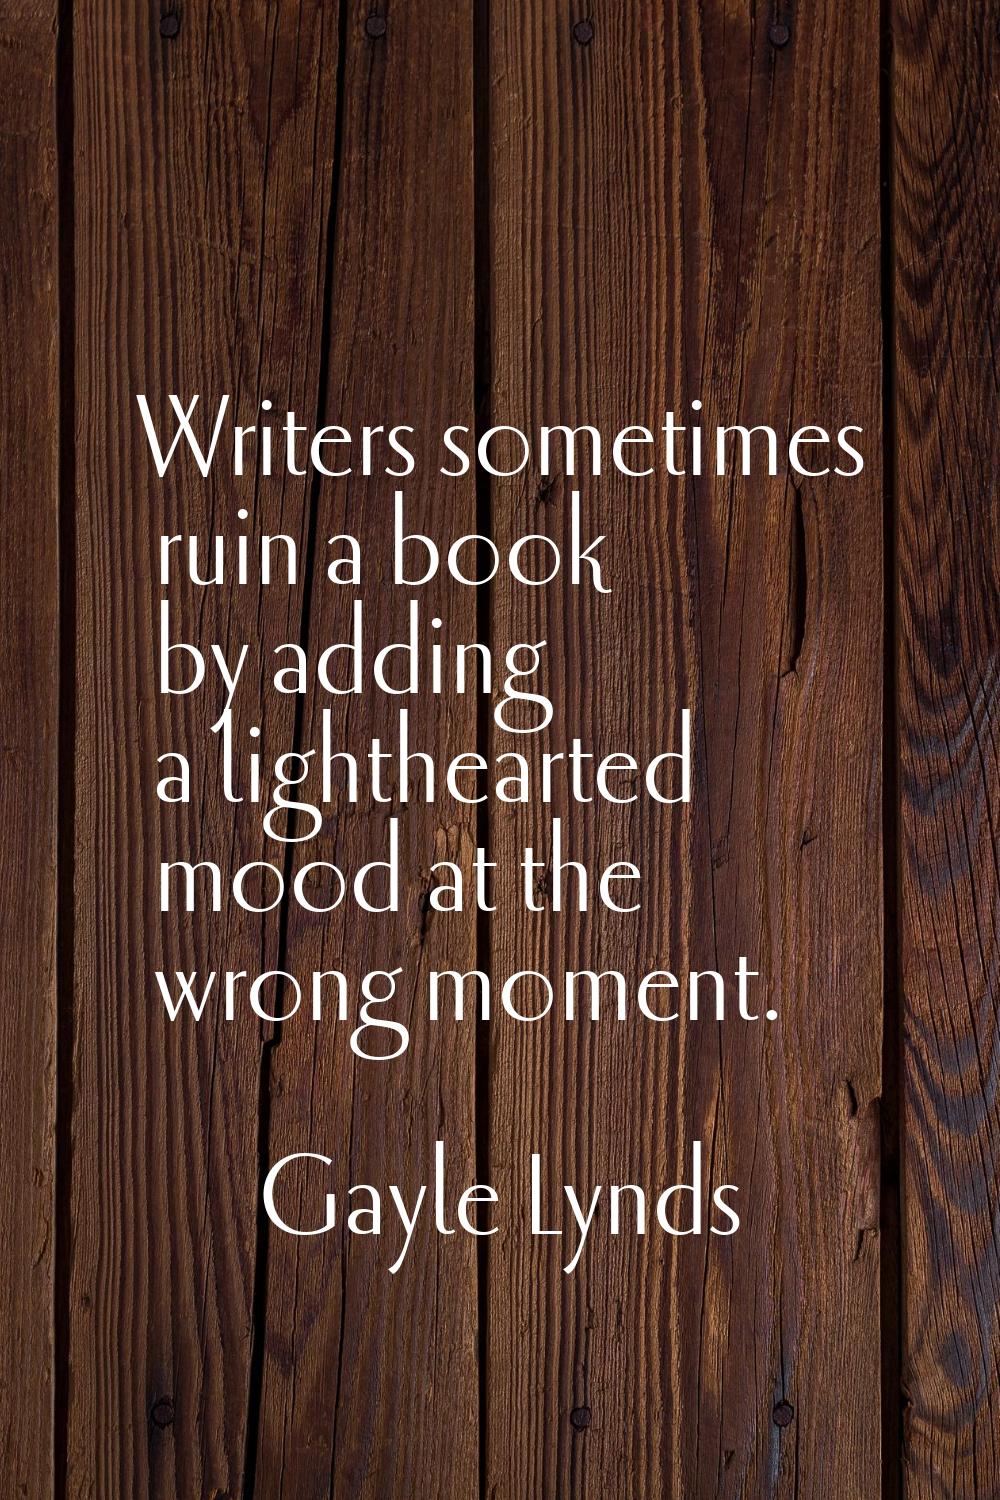 Writers sometimes ruin a book by adding a lighthearted mood at the wrong moment.